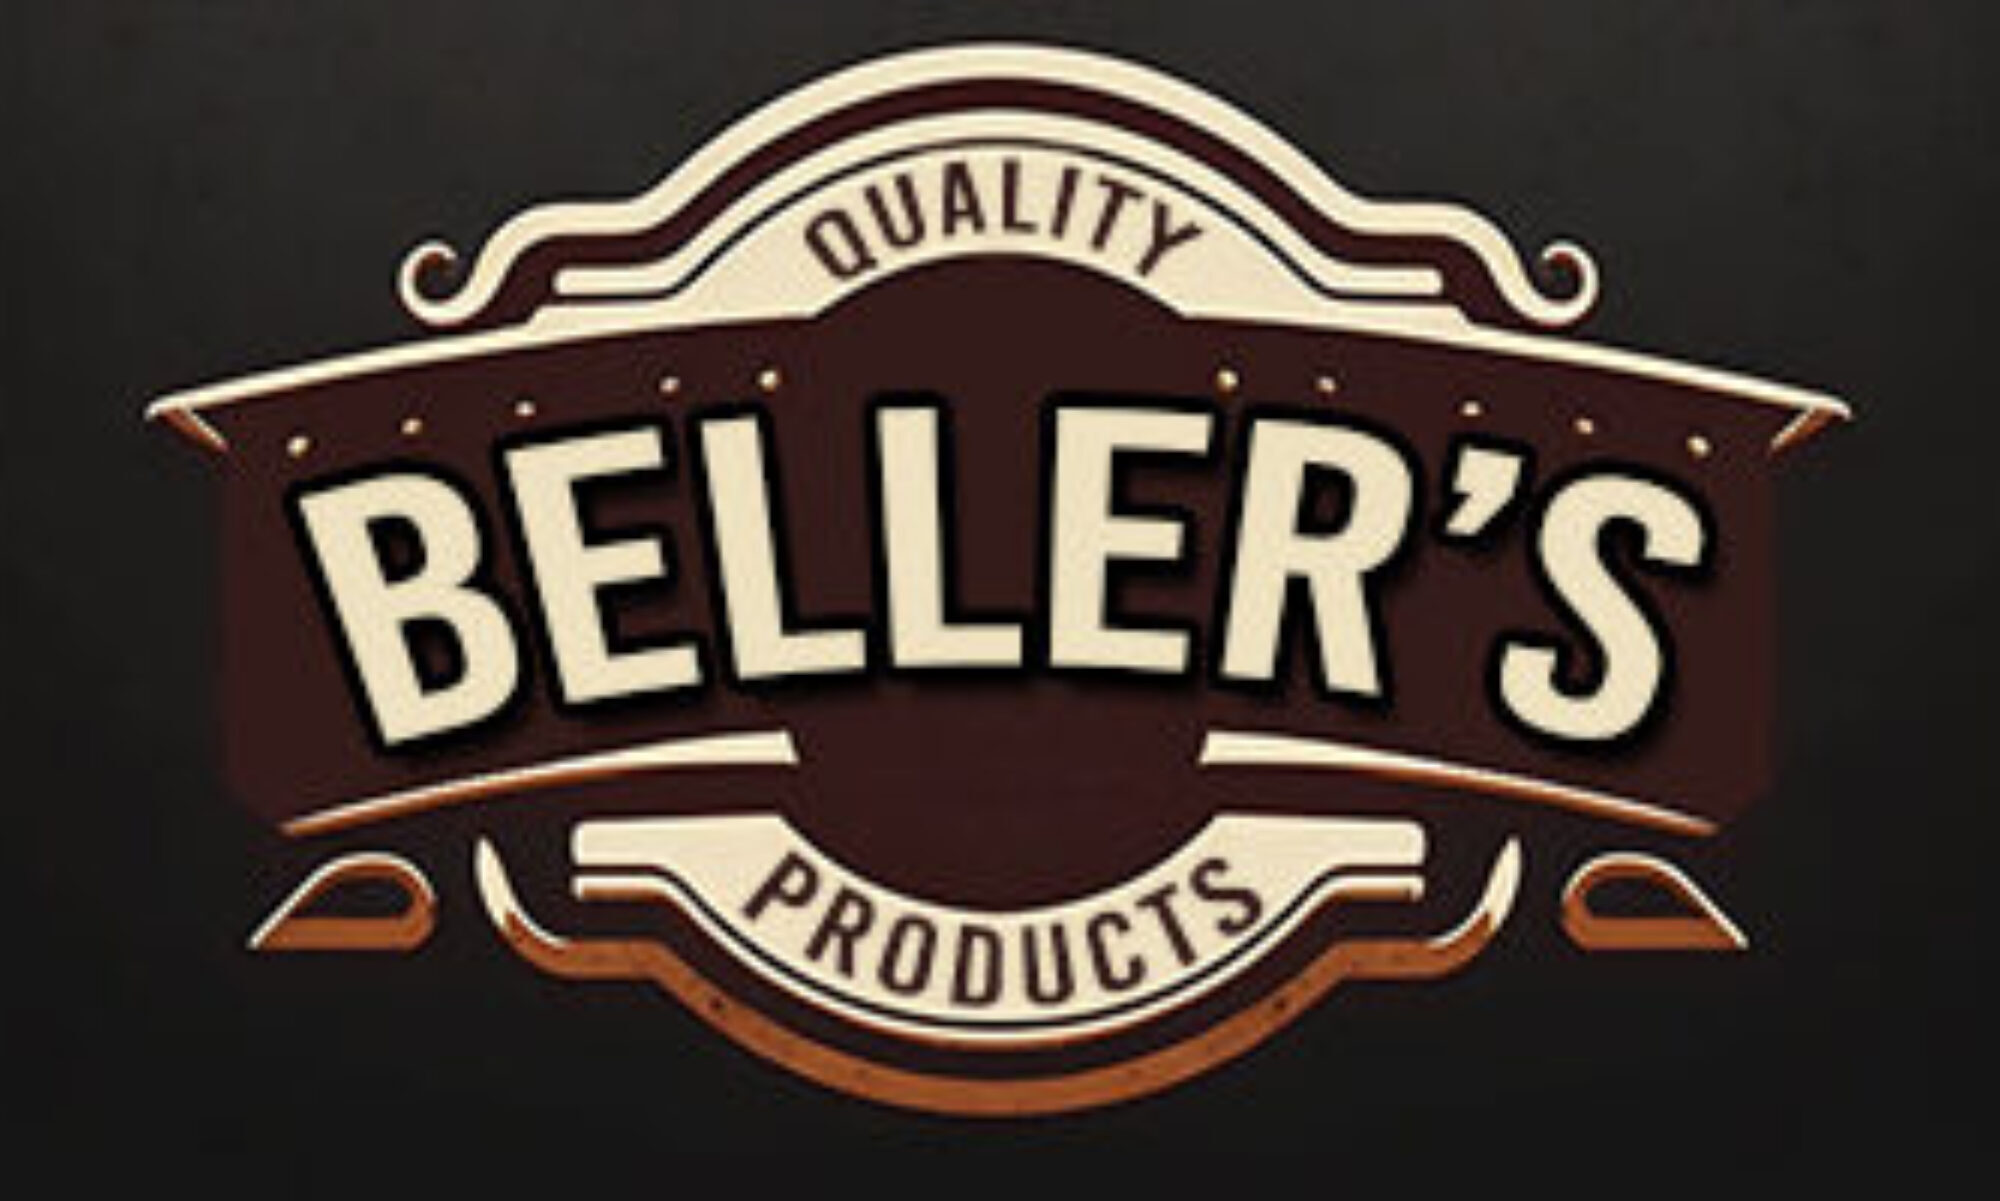 Bellers Products